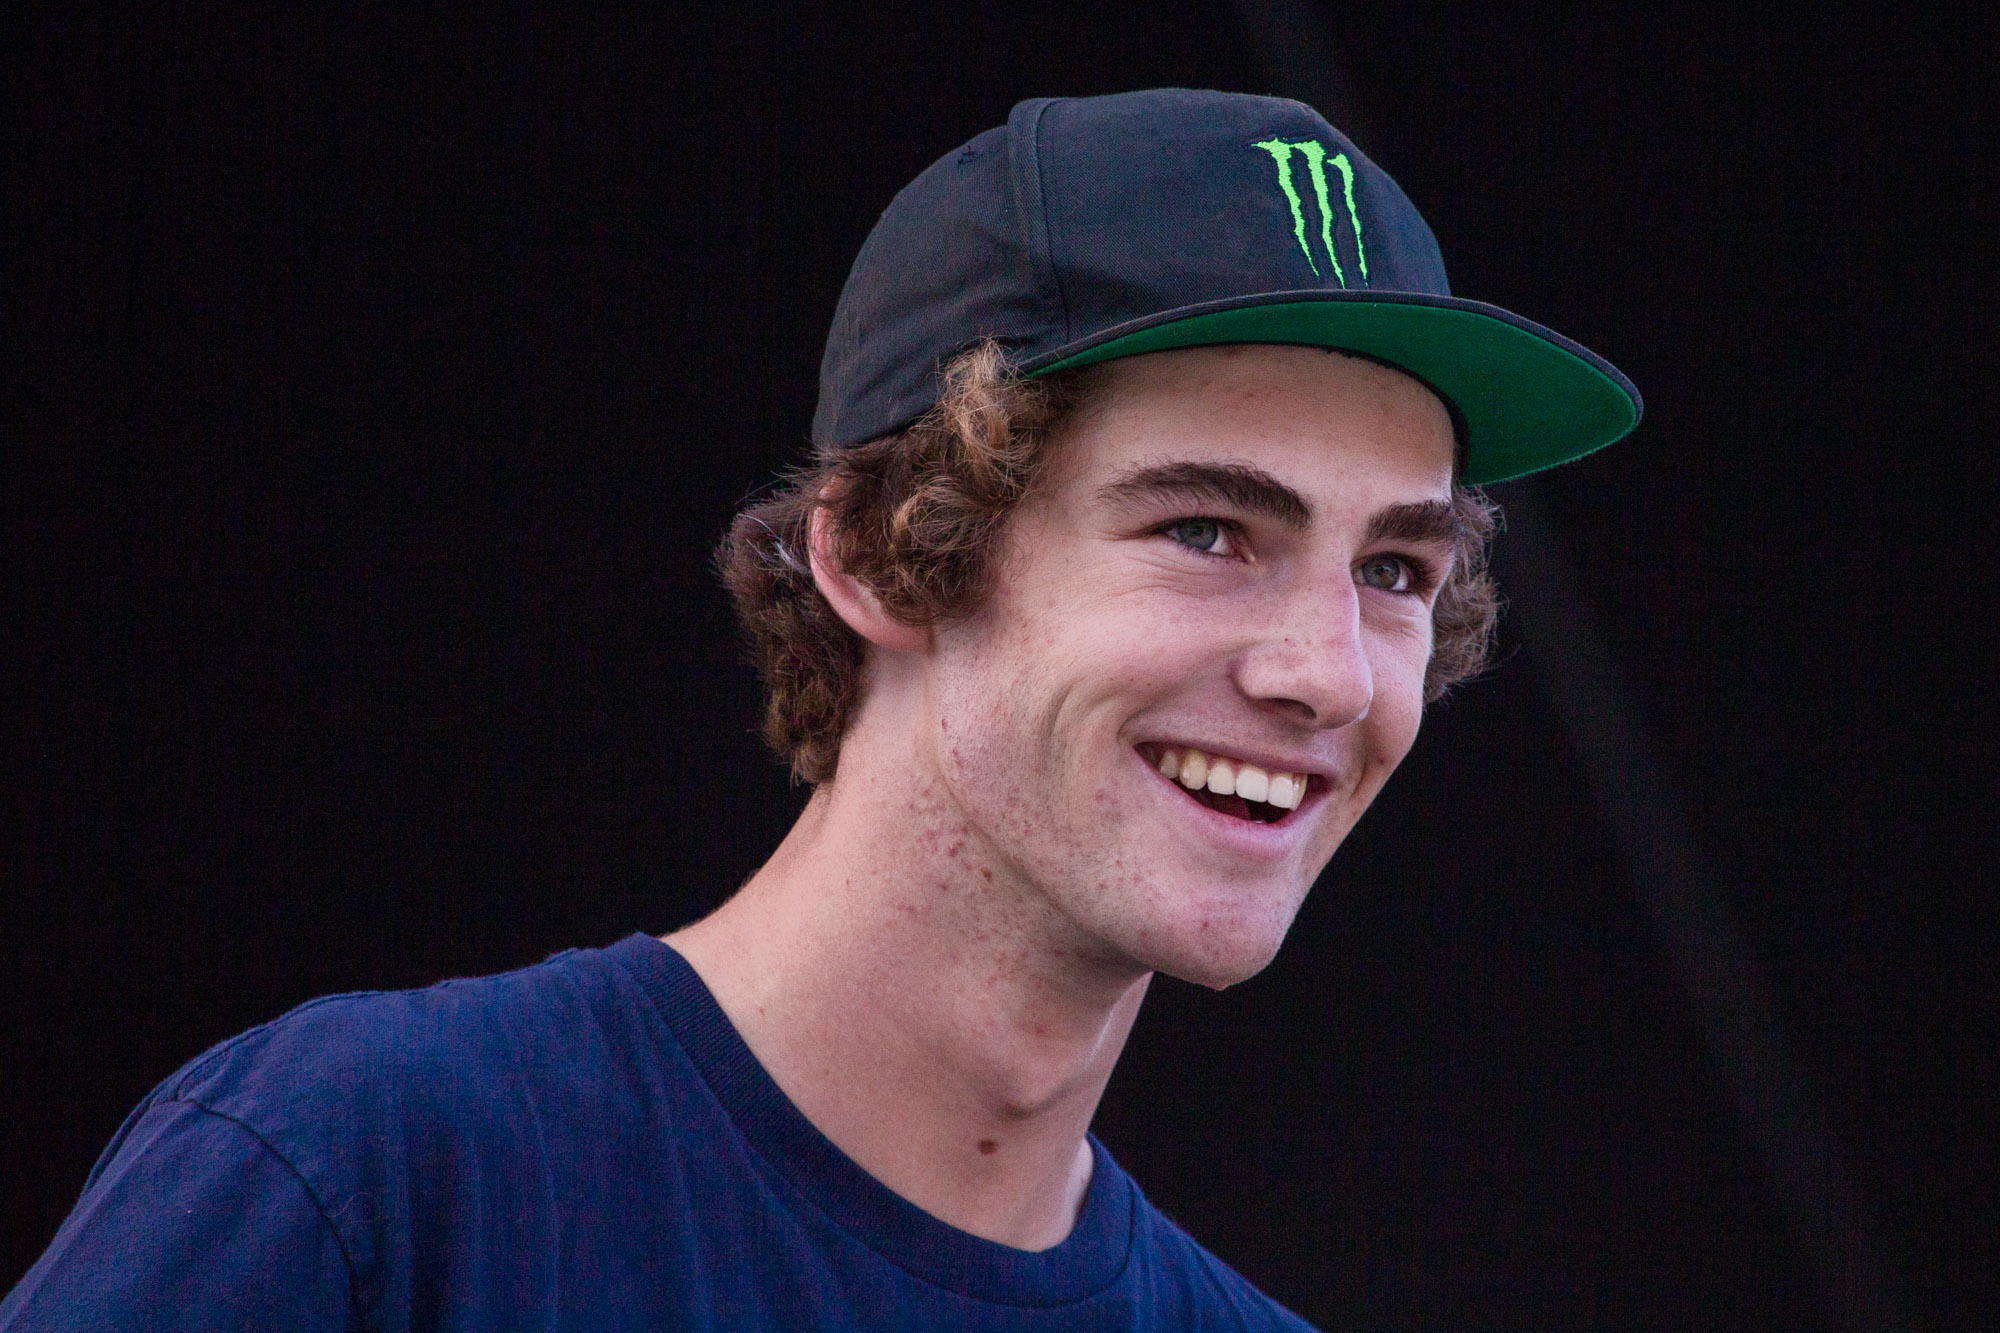 Monster Energy’s Tom Schaar Takes Third Place in Skateboard Park at Air + Style in Los Angeles